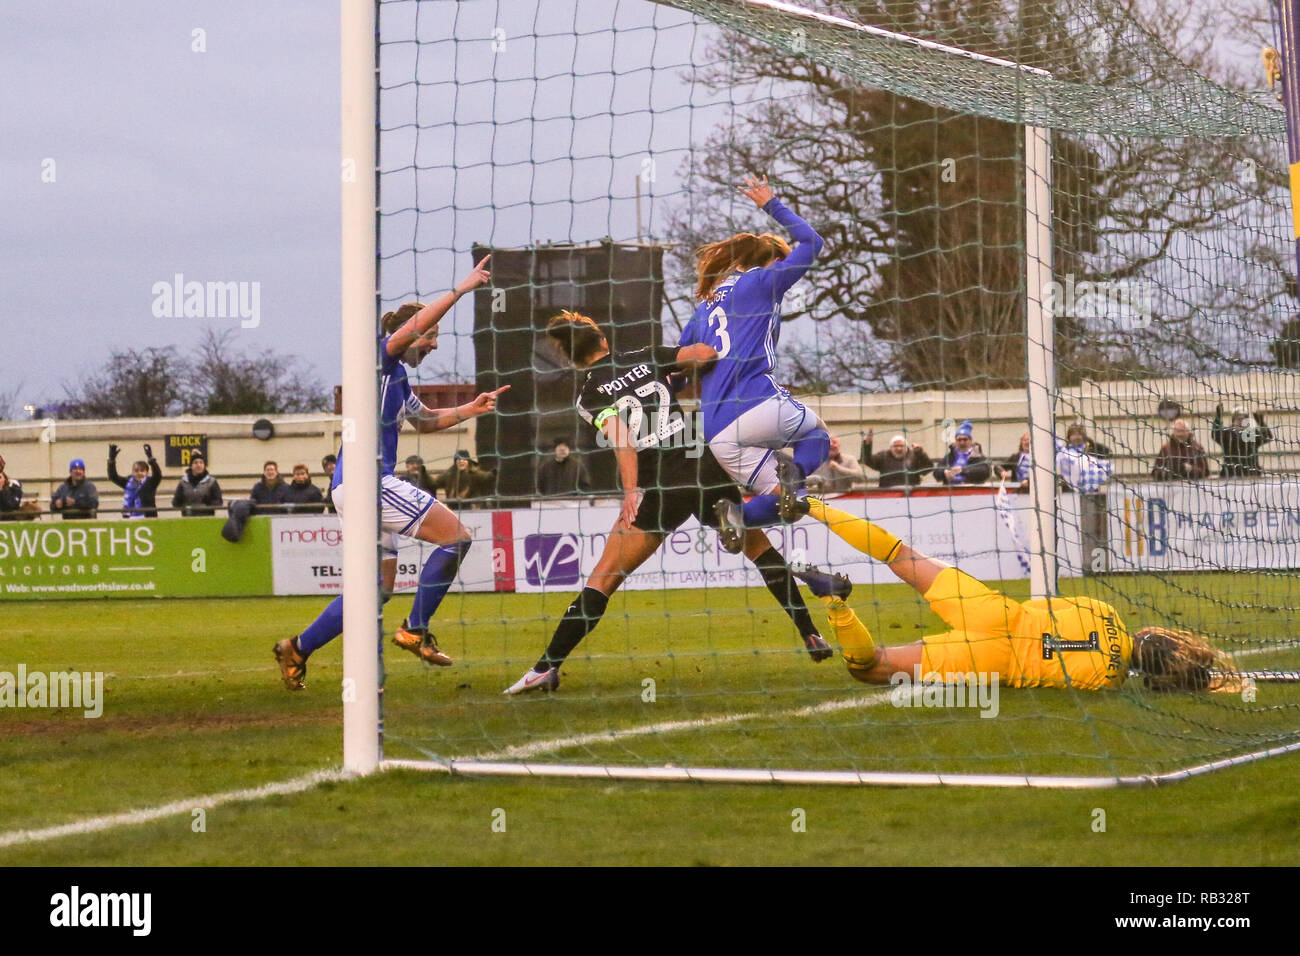 Solihull, UK. 6th January, 2019. Birmingham City's Meaghan Sargeant scores past Reading goalkeeper Grace Maloney in the 88th minute putting the Blues 2-1 ahead against Reading women. BCFC Women won 2-1. Peter Lopeman/Alamy Live News Stock Photo